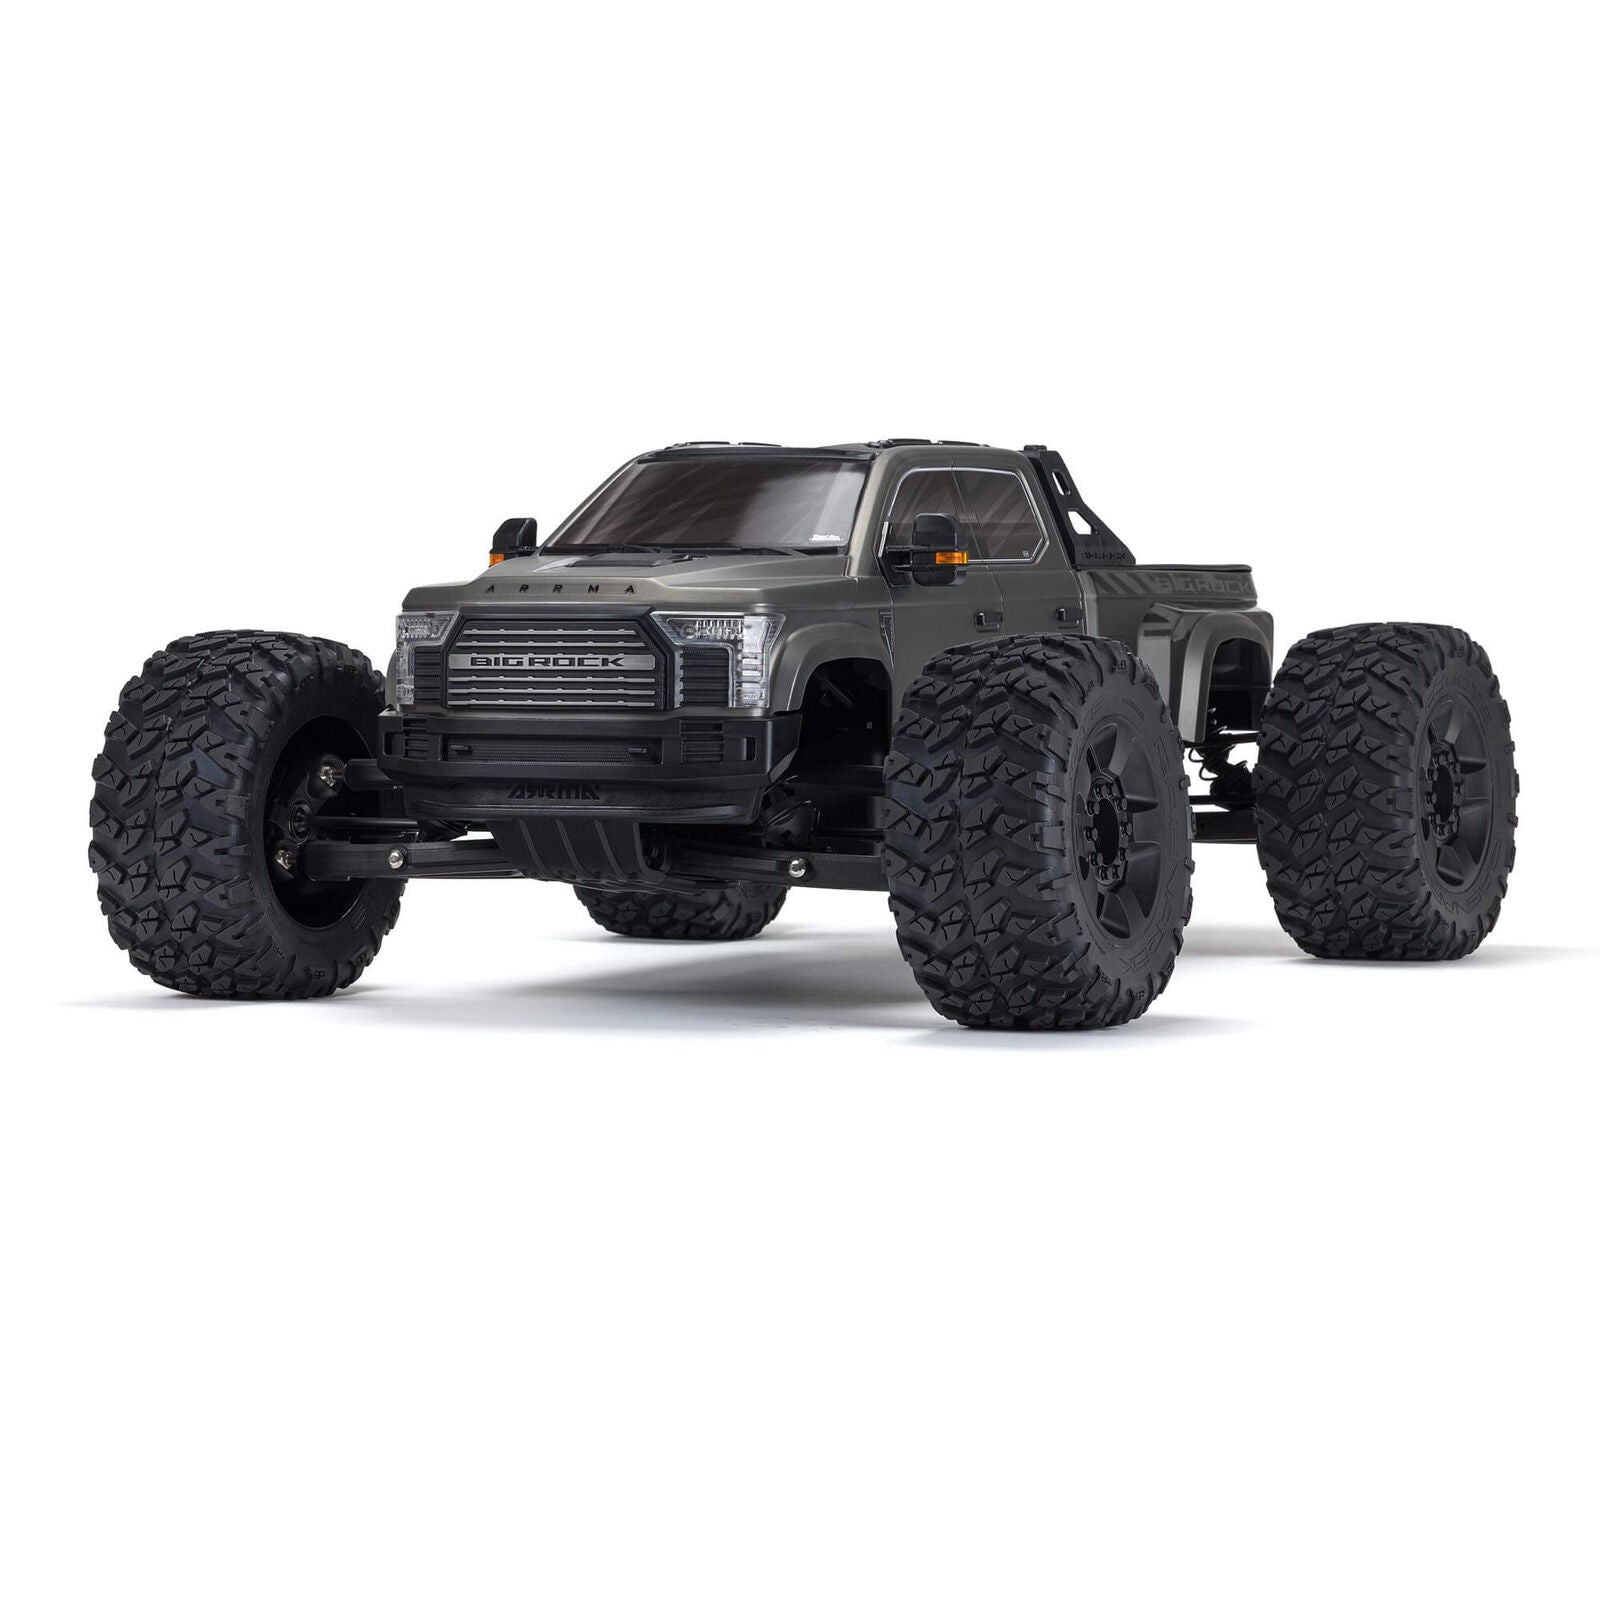 Traxxas Wide Maxx v2 1/10 4WD Brushless Electric Monster Truck, VXL-4S, TQi  - Bl